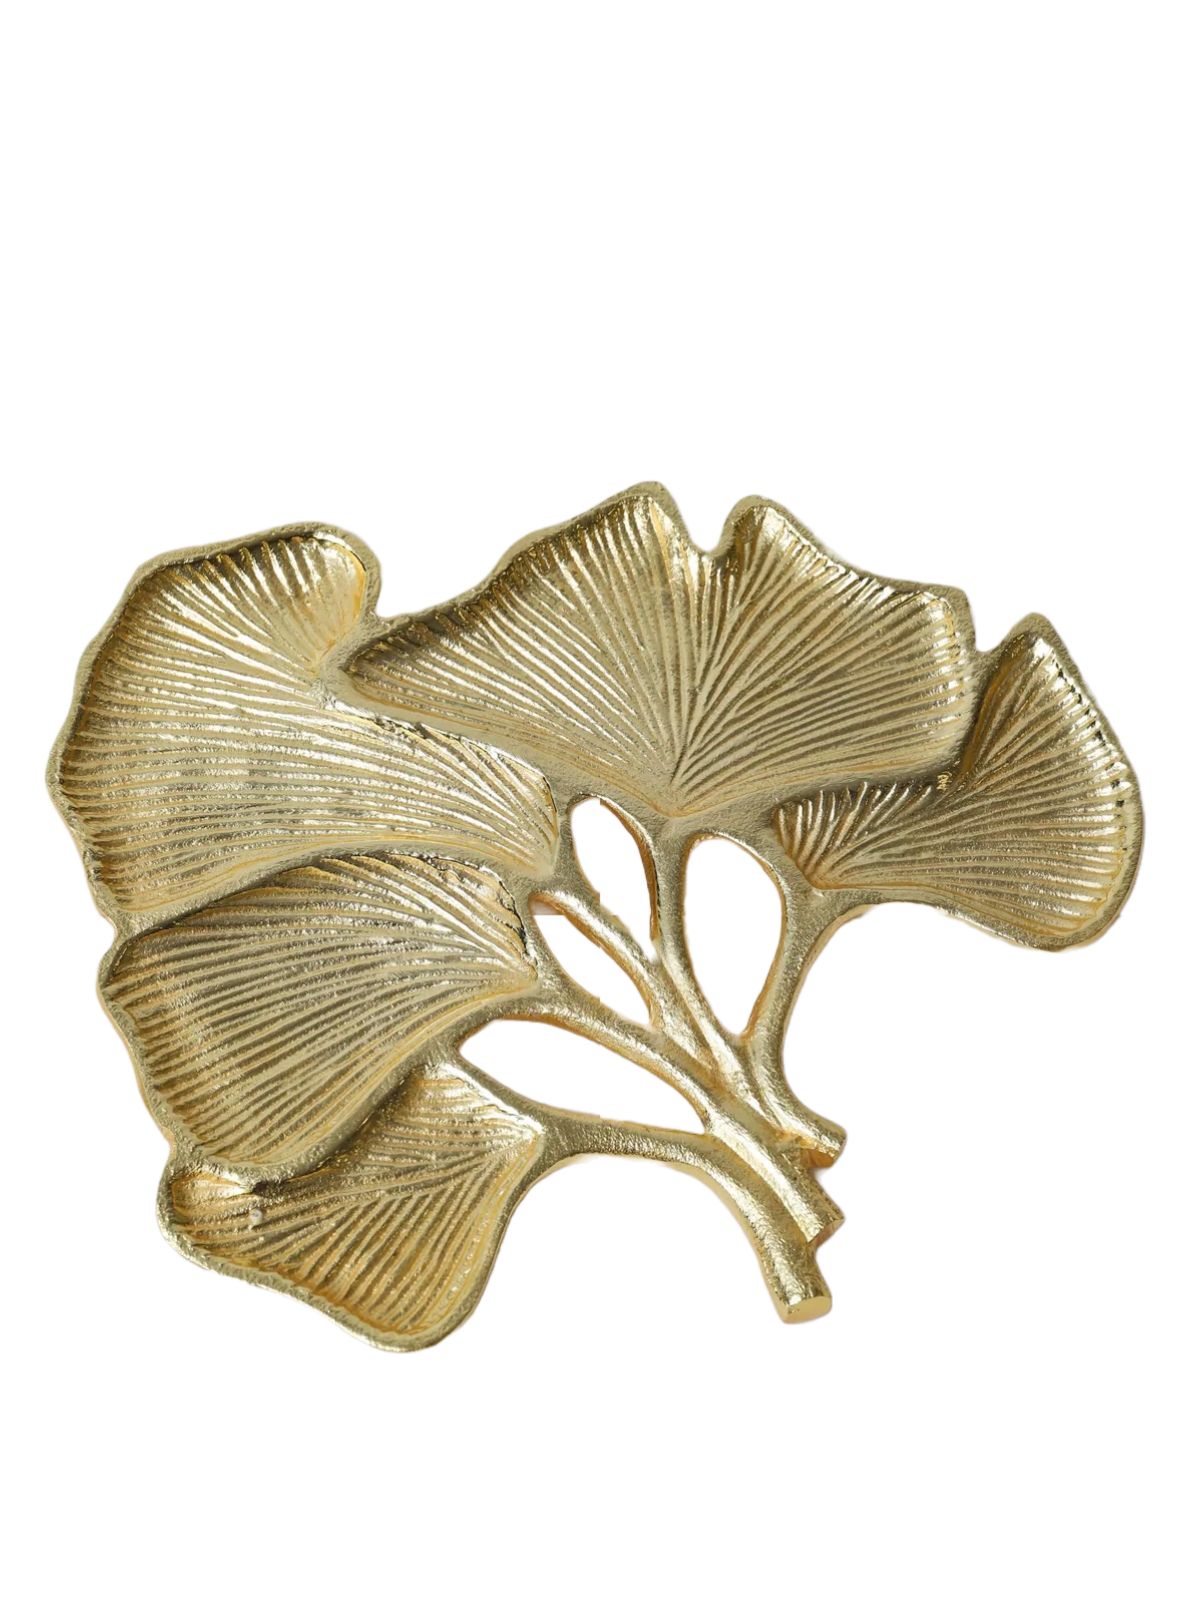 This stunning gold leaf sectional trivet dish was artfully crafted with stainless steel to make a statement Size 11.75L available at KYA Home Decor